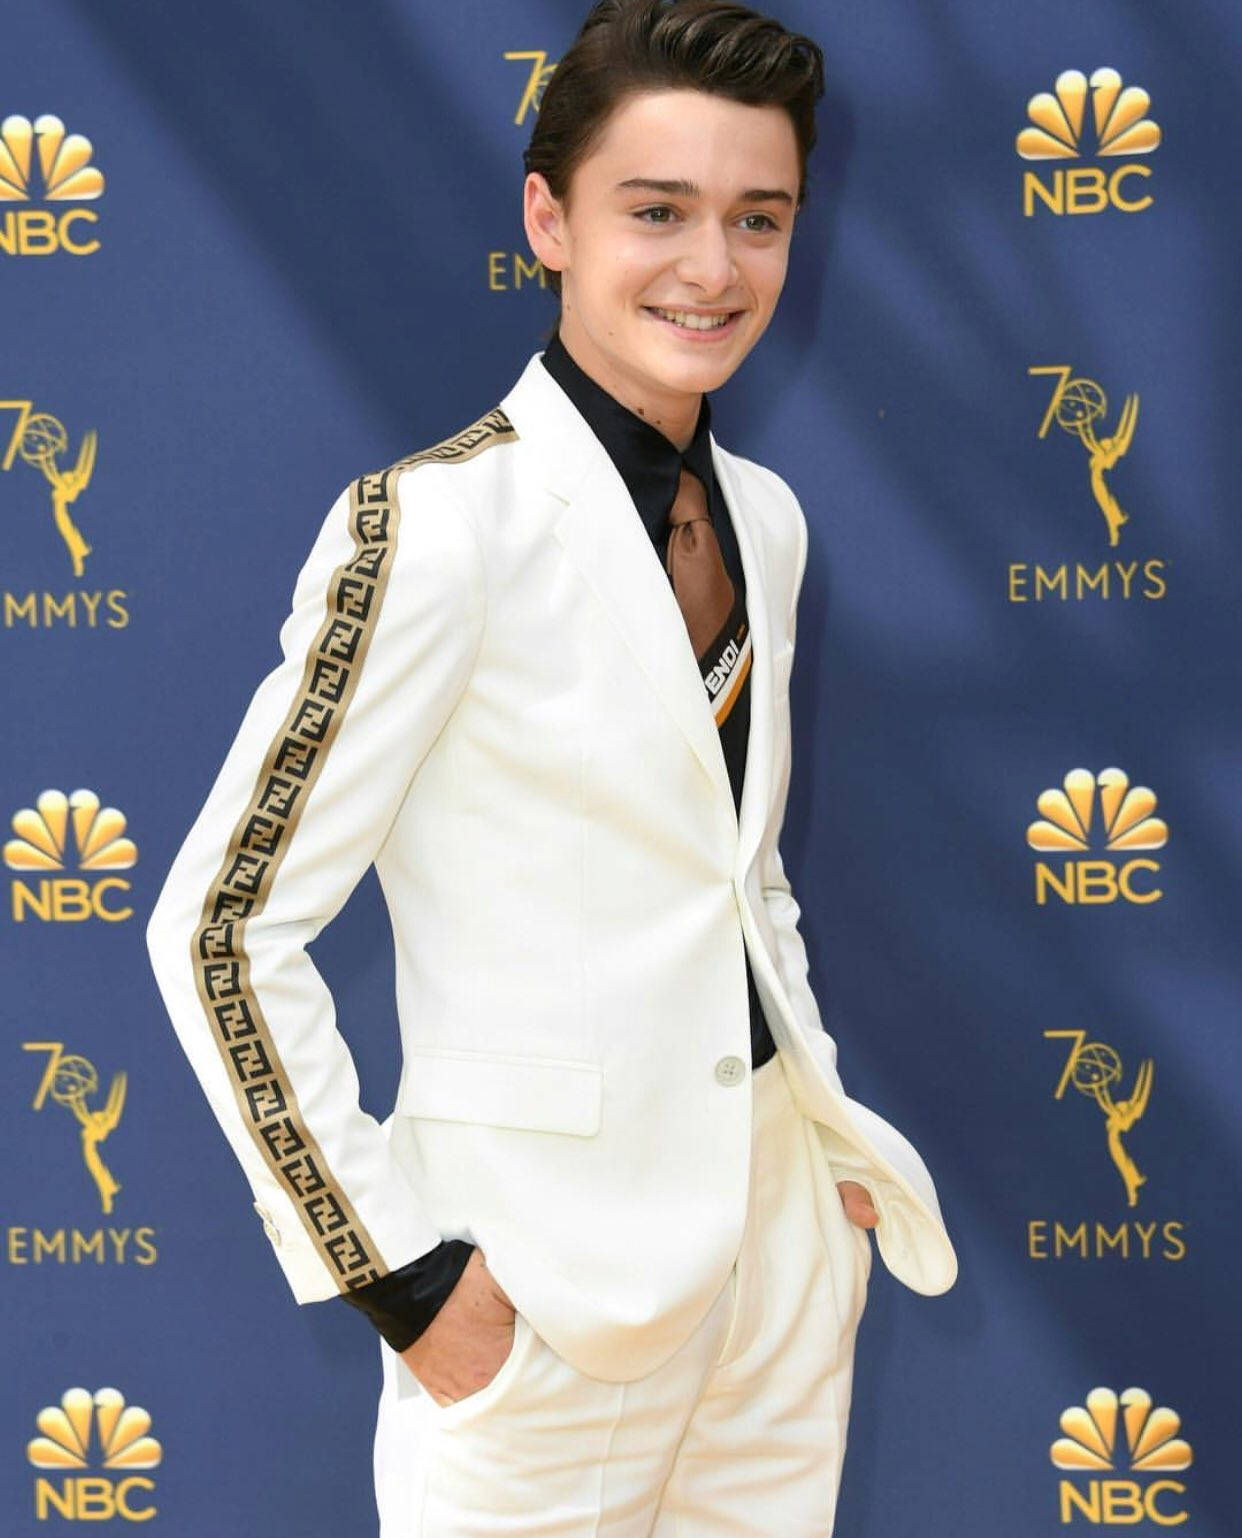 Noahschnapp I Vit Kostym. (this Could Be A Suggestion For A Computer Or Mobile Wallpaper Featuring Actor Noah Schnapp In A White Suit.) Wallpaper